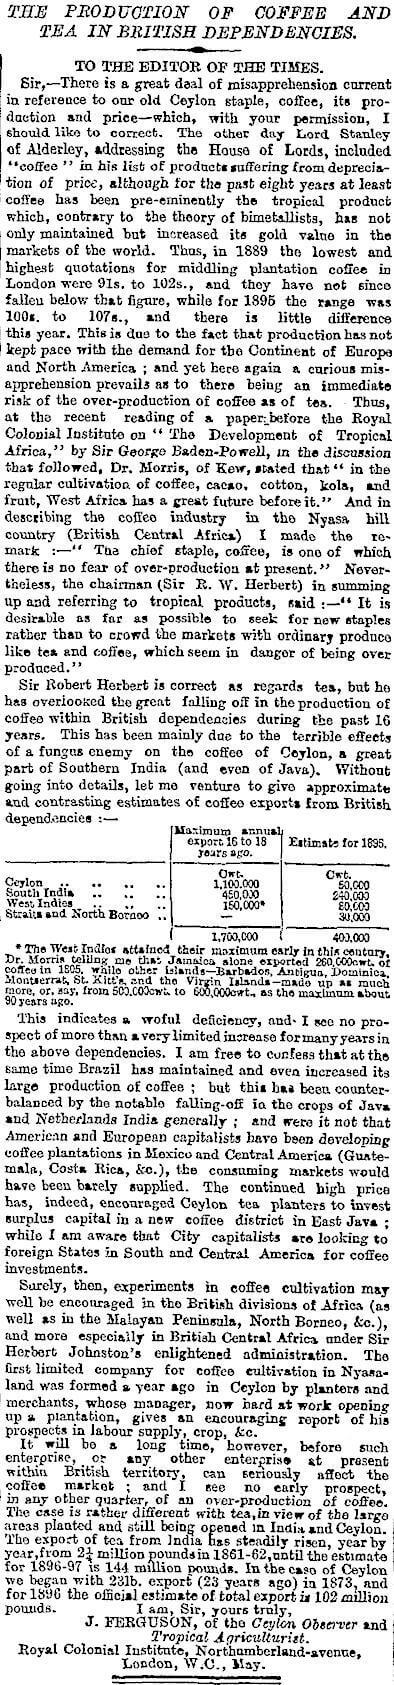 17.The Production of Coffee and Tea in British Dependencies